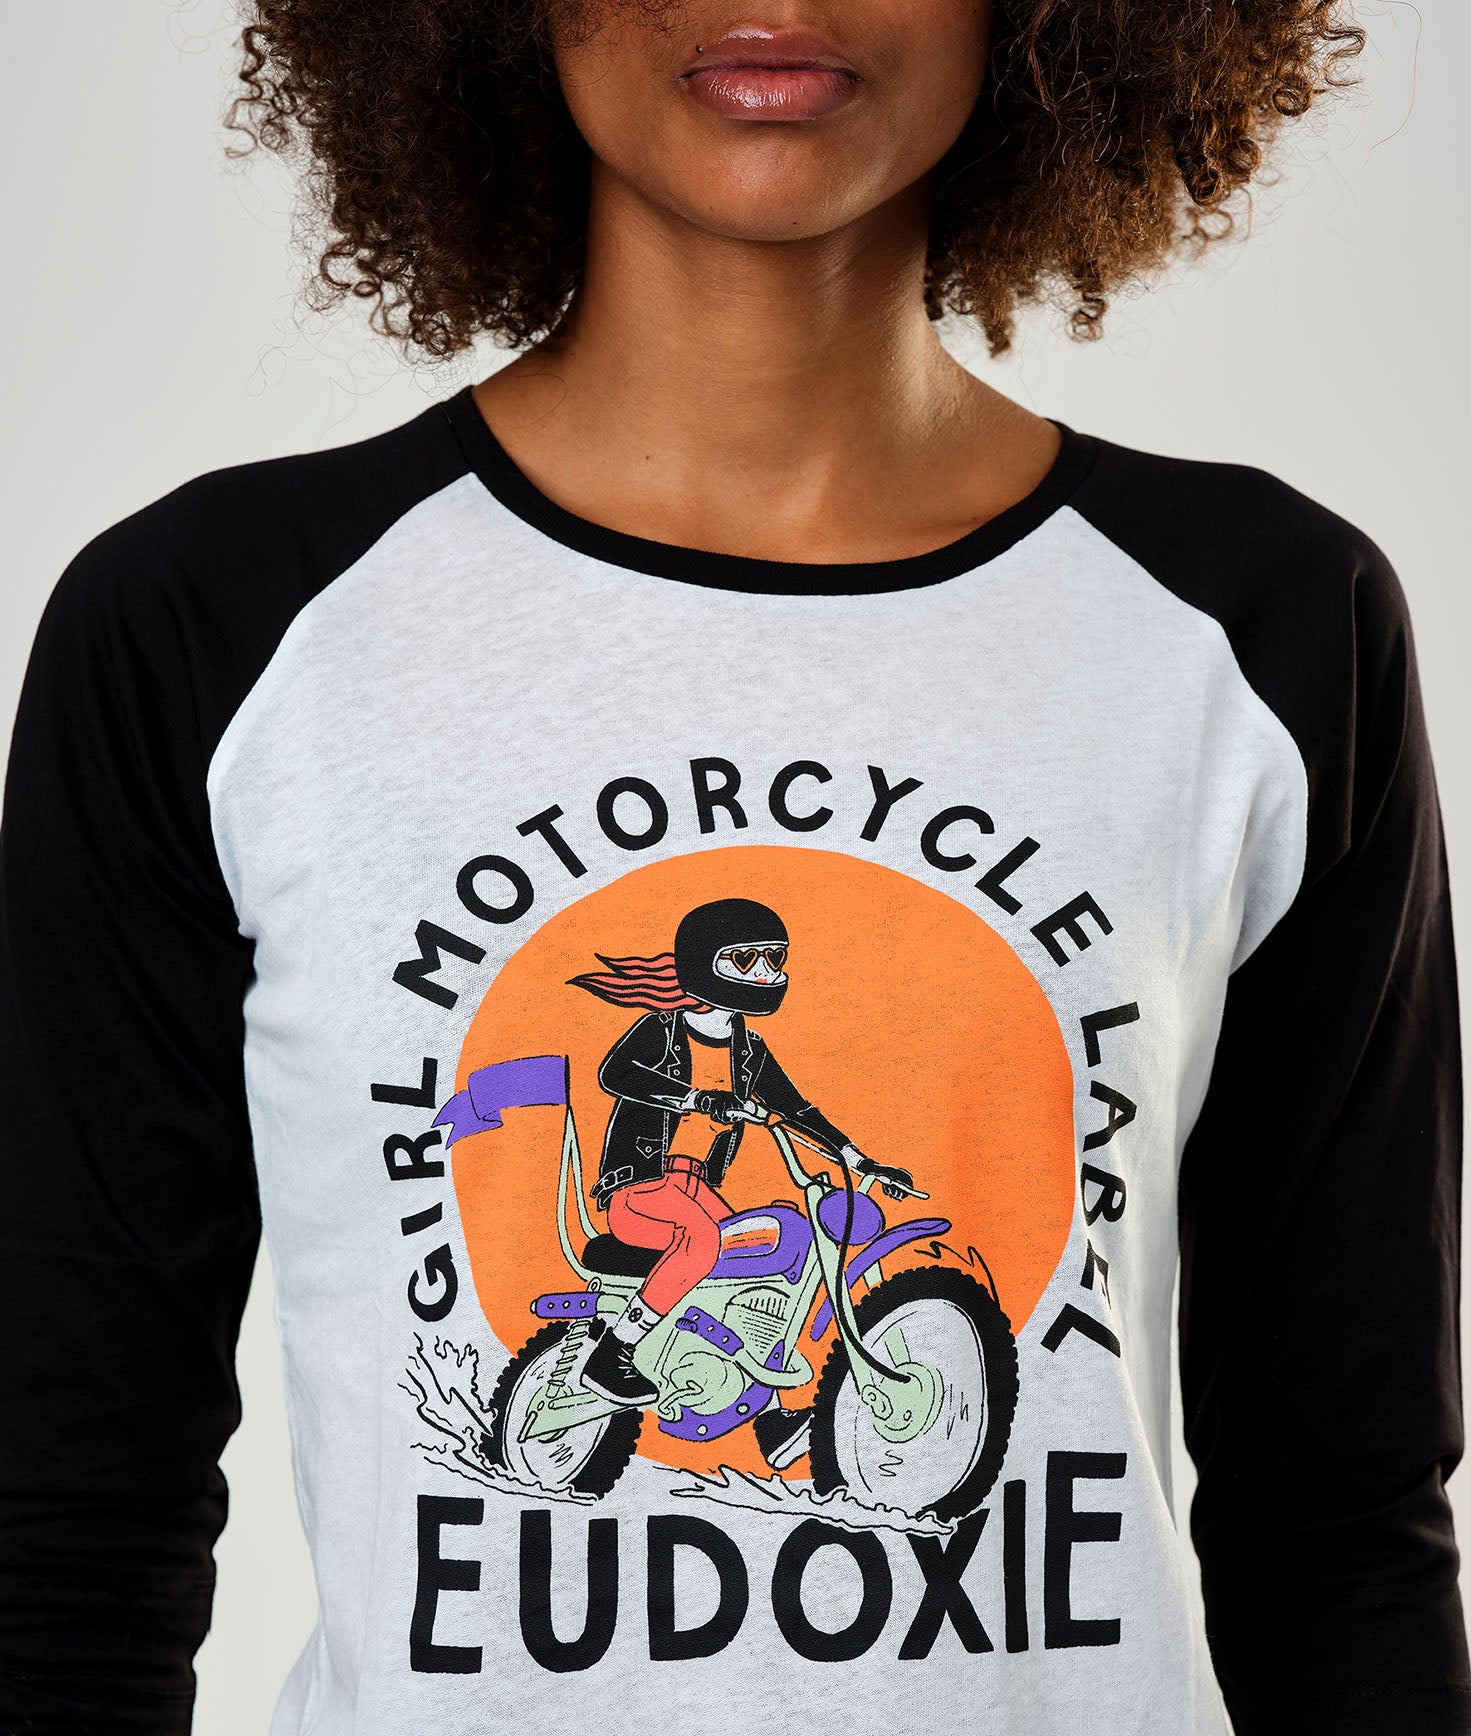 A young woman wearing black &amp; white baseball motorcycle t-shirt with Girl motorcycle label motive from Eudoxie 